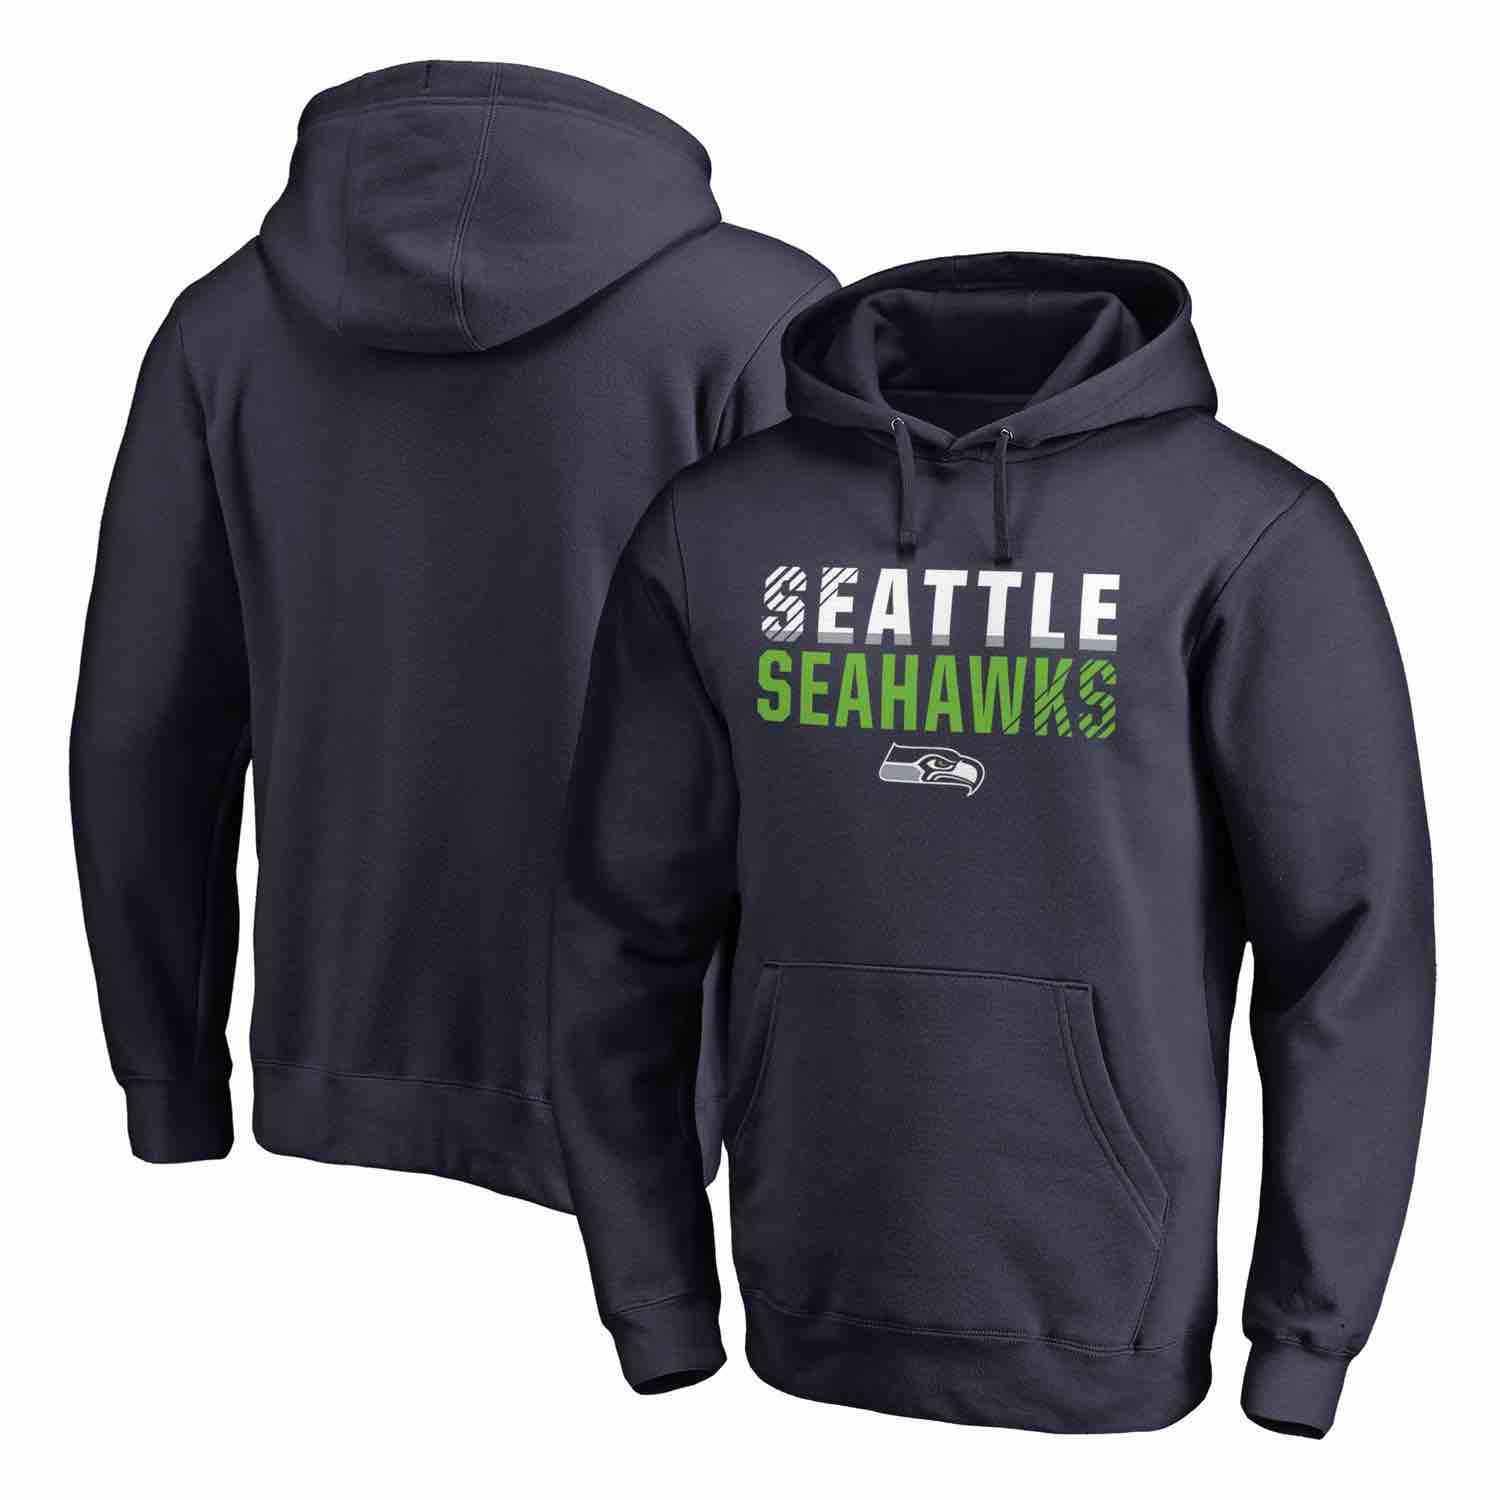 Mens Seattle Seahawks NFL Pro Line by Fanatics Branded College Navy Iconic Collection Fade Out Pullover Hoodie